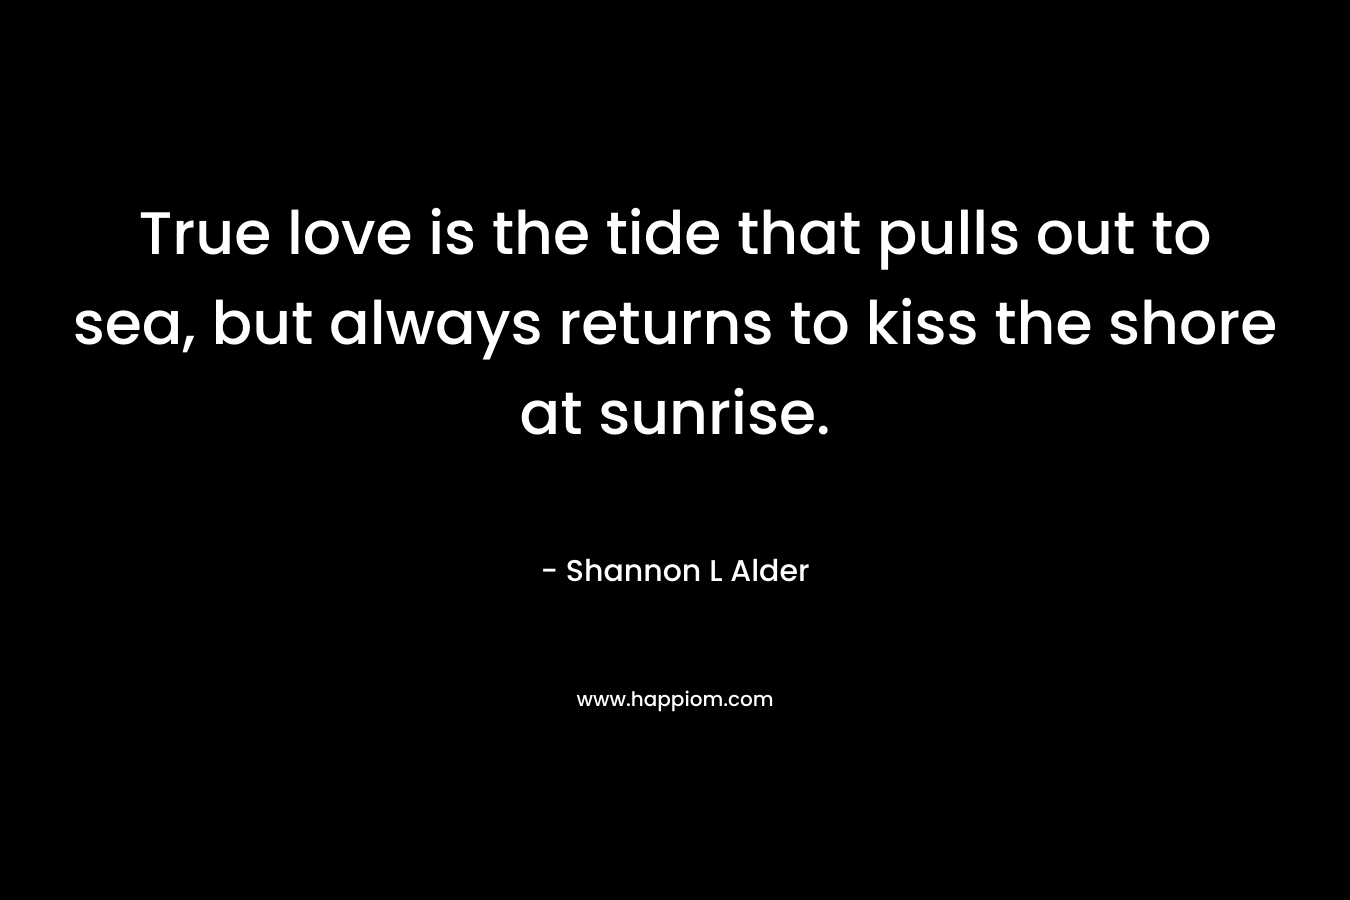 True love is the tide that pulls out to sea, but always returns to kiss the shore at sunrise.